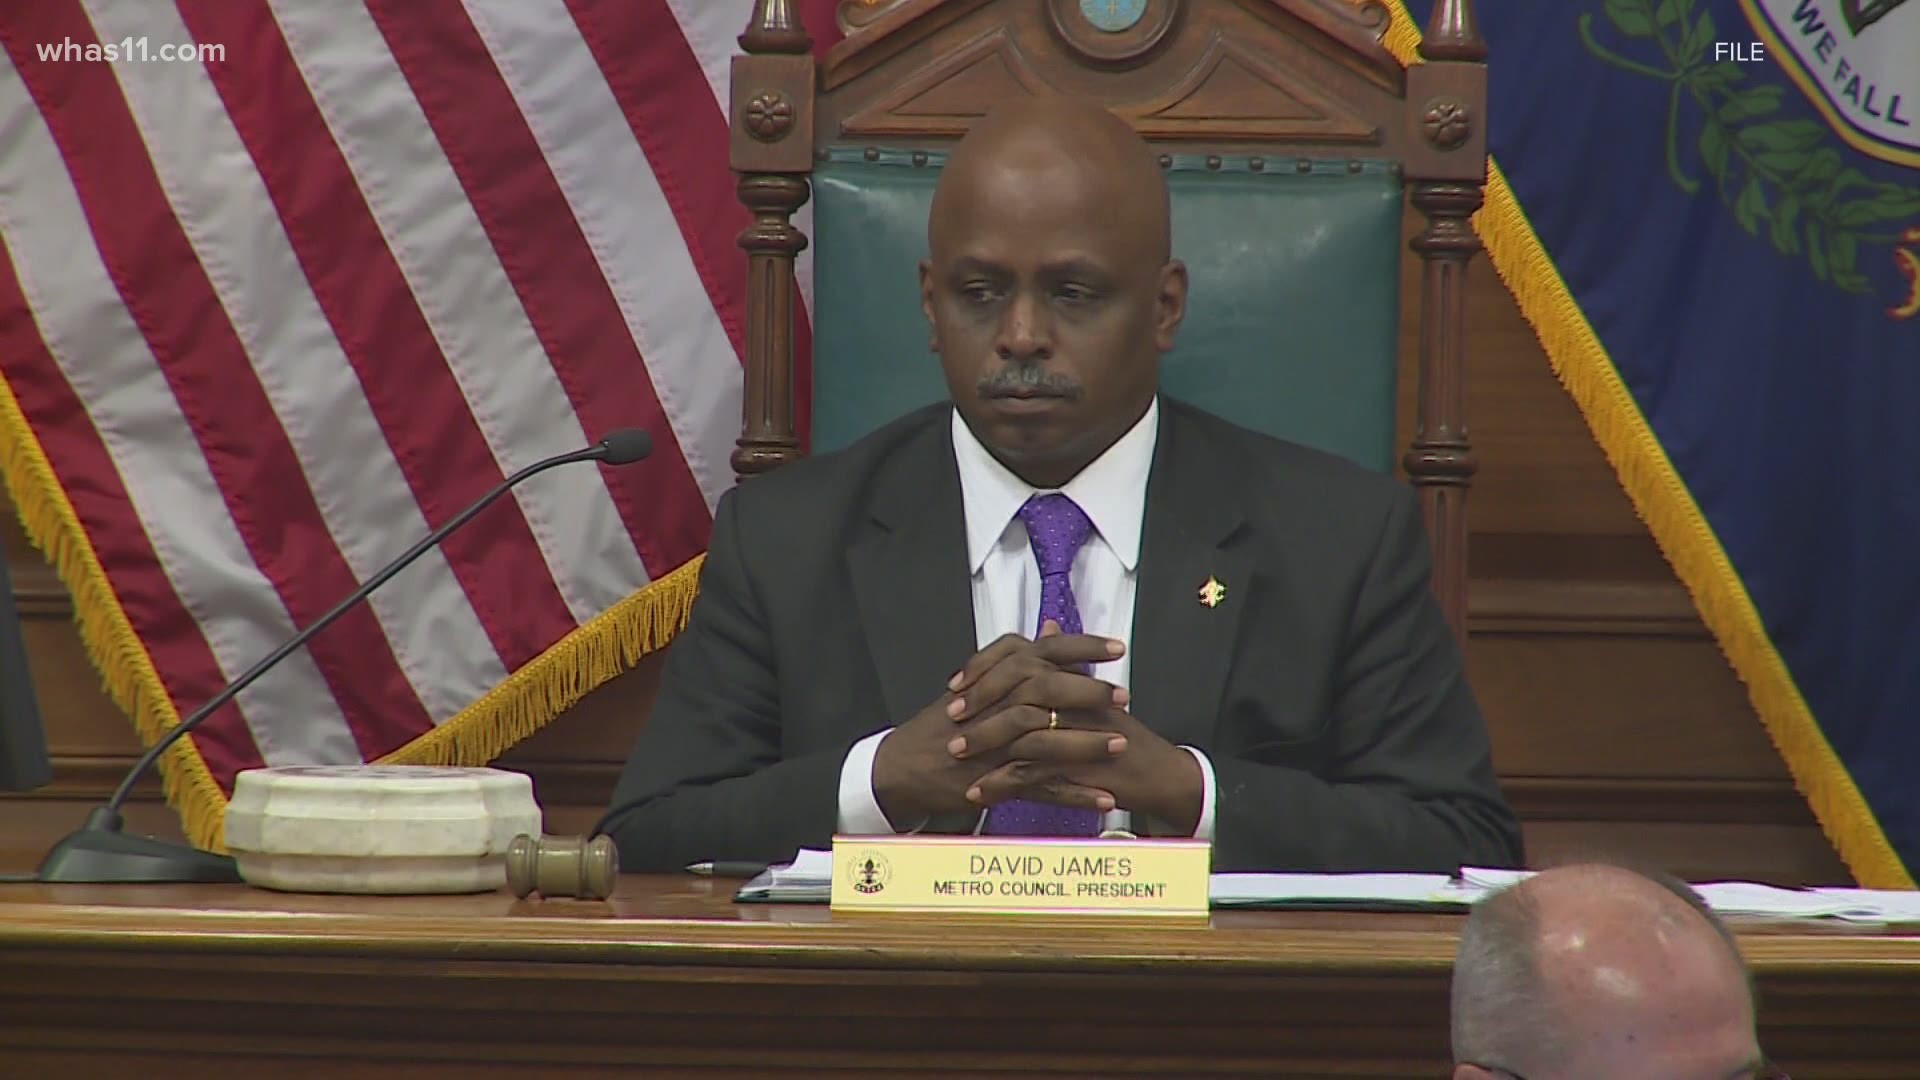 James cited health concerns as his reasons for bowing out of the 2022 race for Louisville mayor.